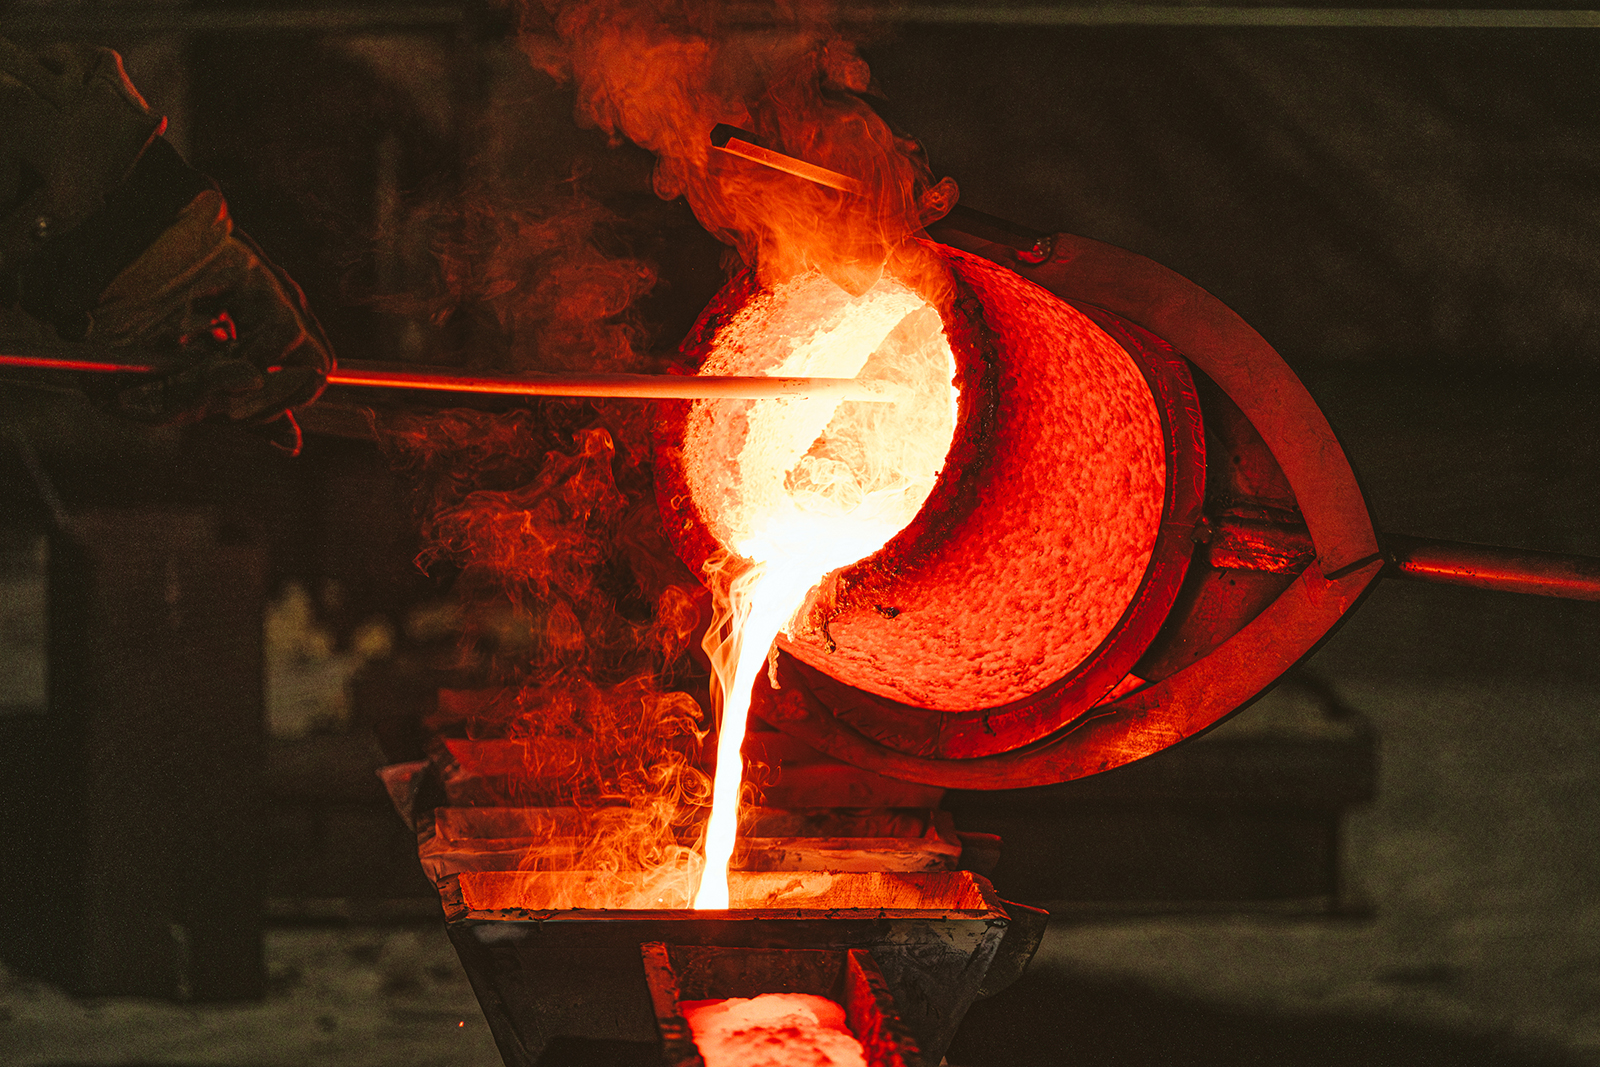 Molten bronze produced by melting Charlottesville's monument of Robert E. Lee is poured from a hot crucible into ingot molds, Oct. 21, 2023. Photo © Eze Amos